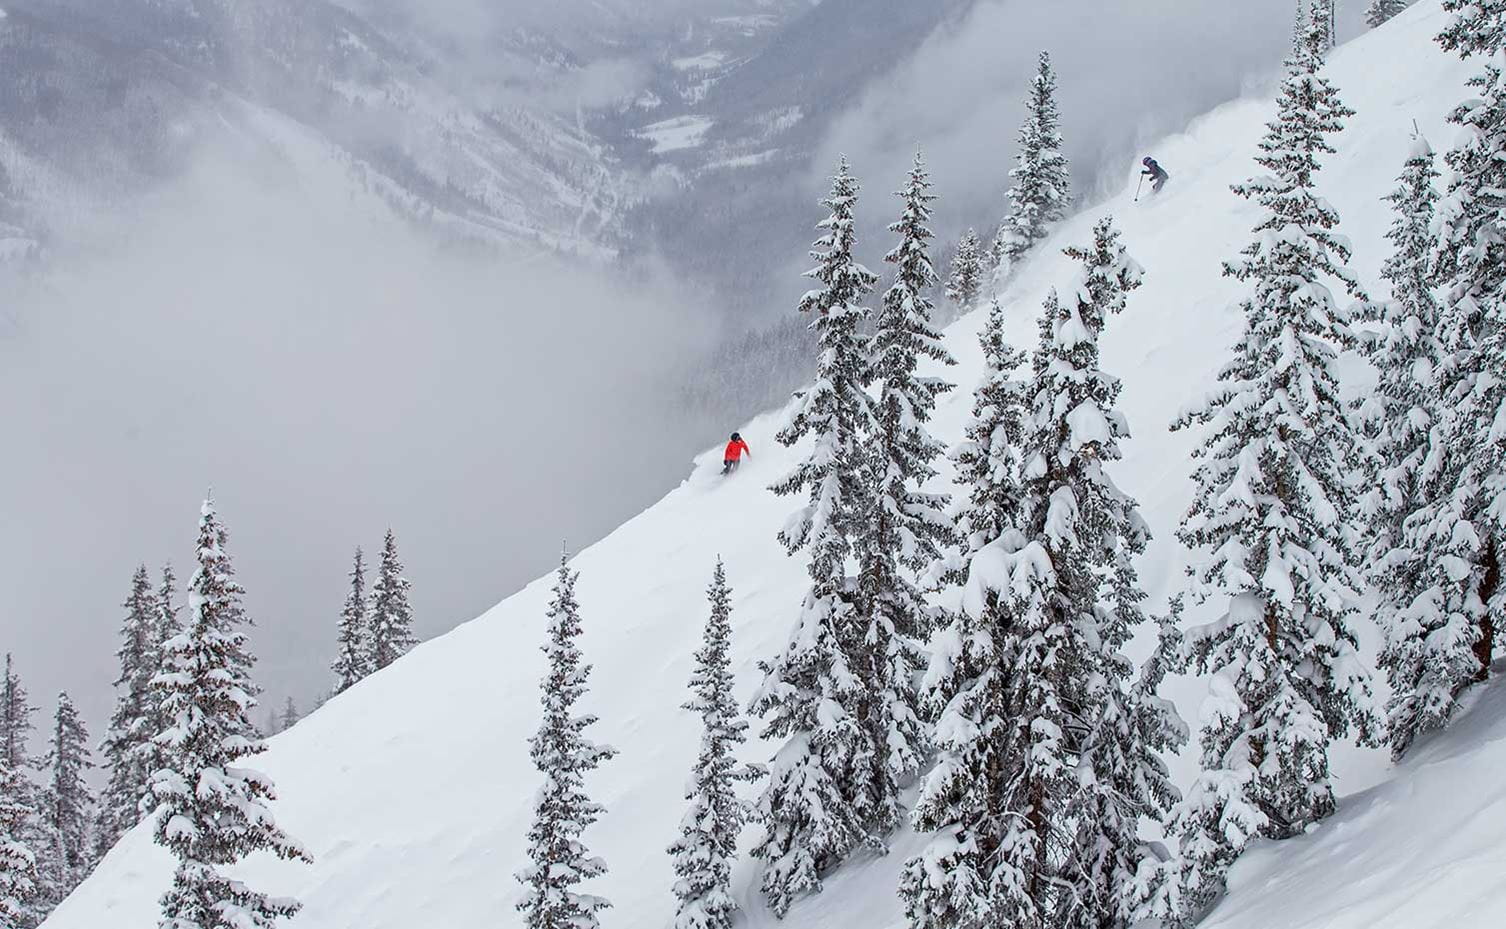 Two skiers enjoy pristine skiing conditions at Aspen Snowmass